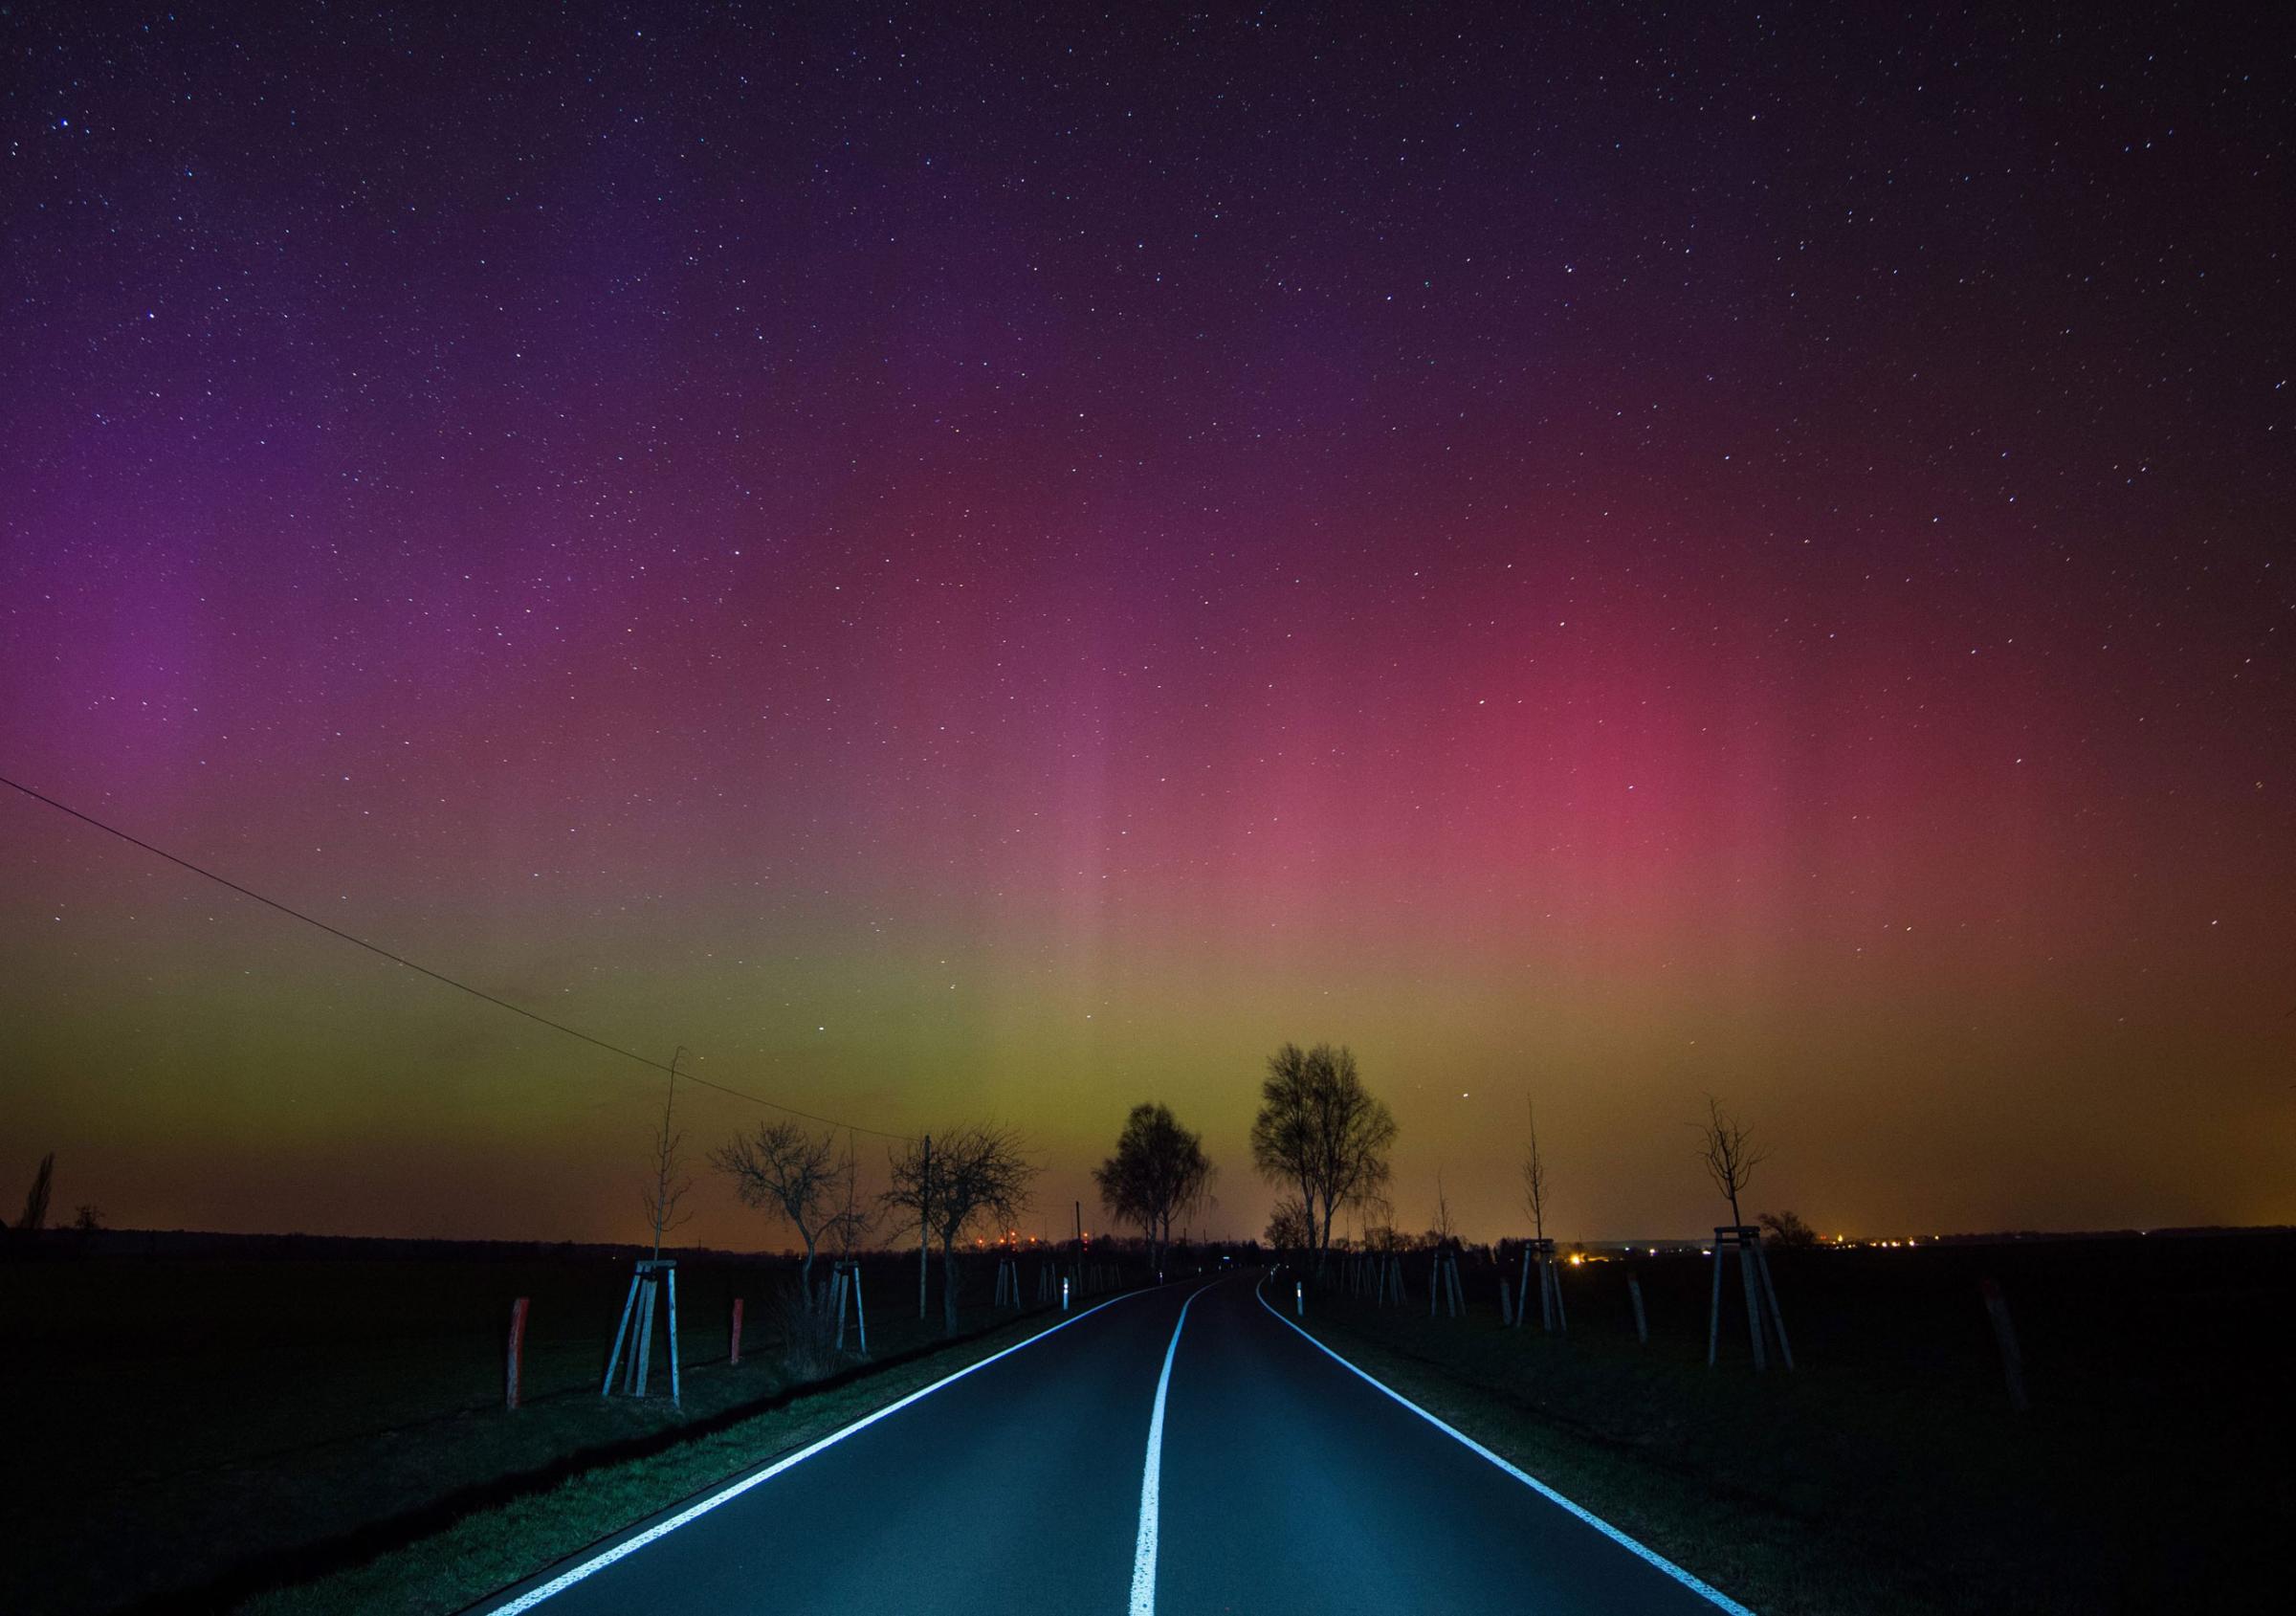 The Northern Lights over a country road near Lietzen in Maerkisch-Oderland, Germany, on March 17, 2015.